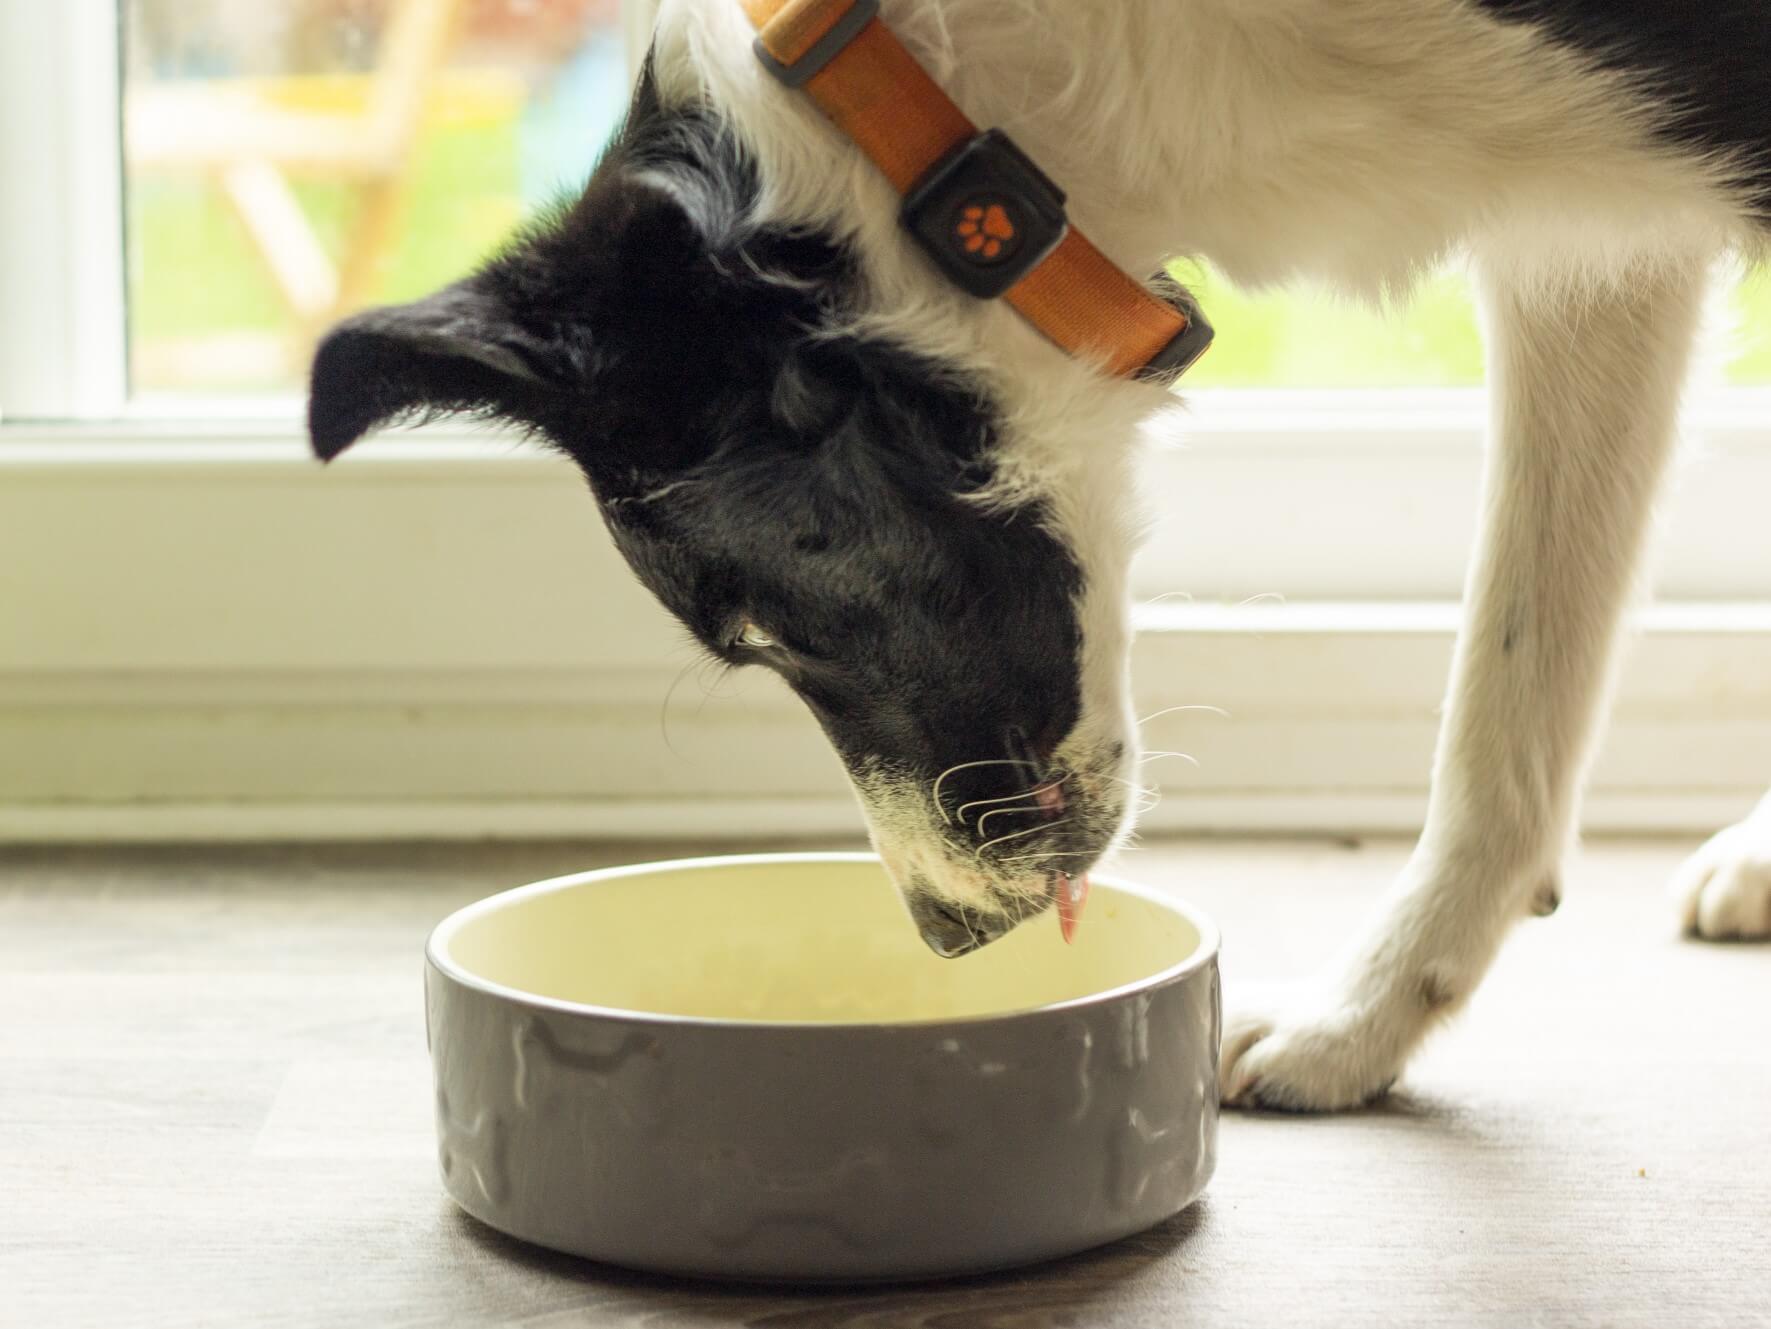 What Should I Do About My Dog’s Grain-Free Diet